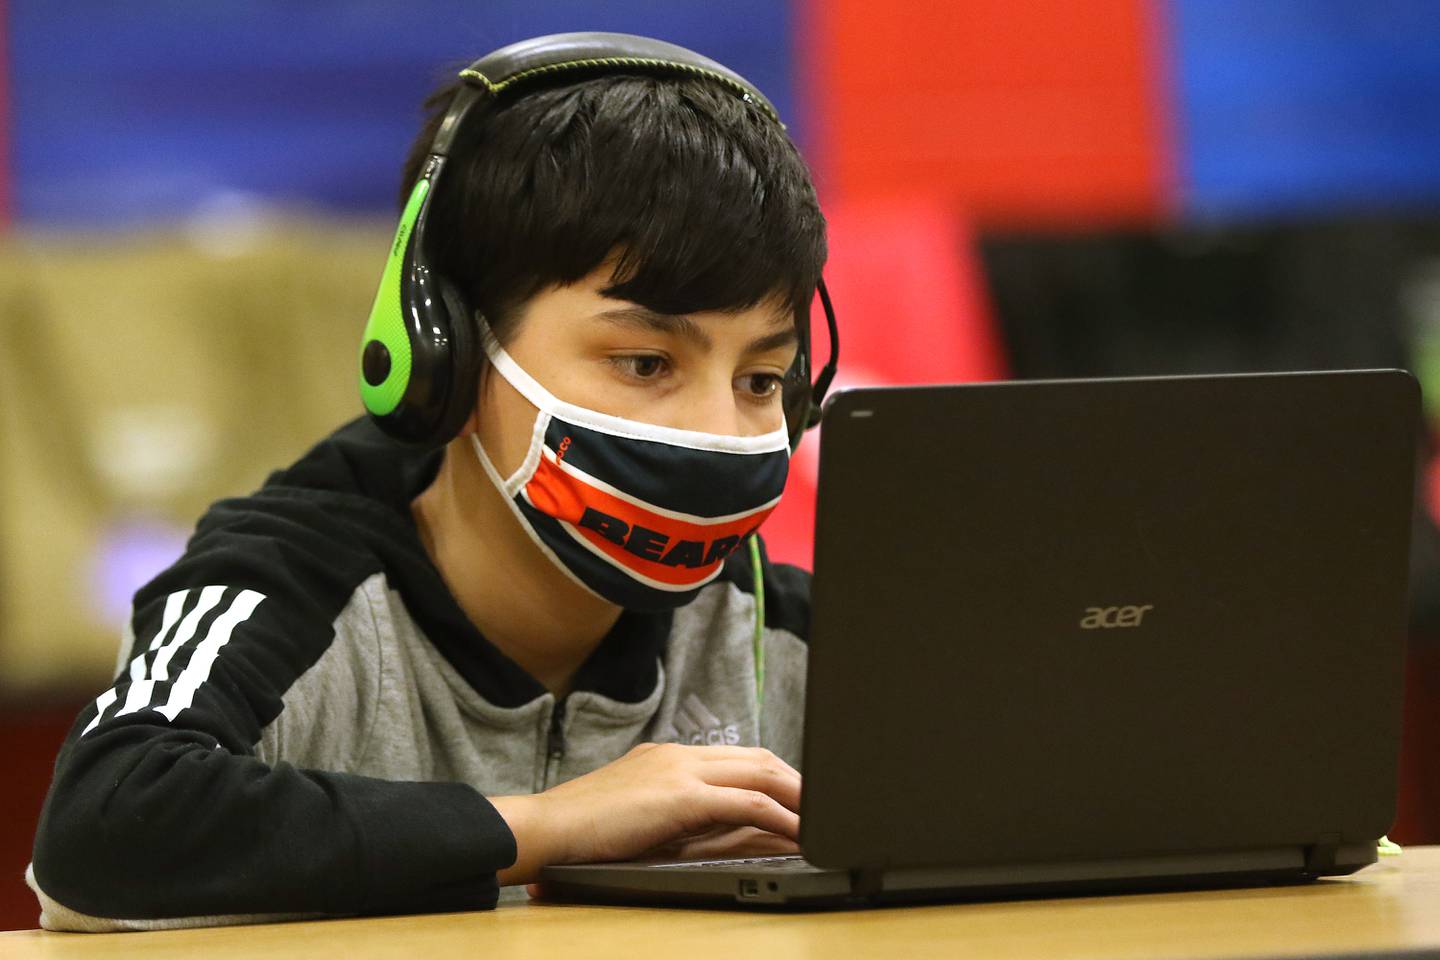 Sixth grade student Karter Hall works on his homework in an after school homework help program at Marengo Community Middle School on Wednesday, March 24, 2021 in Marengo.